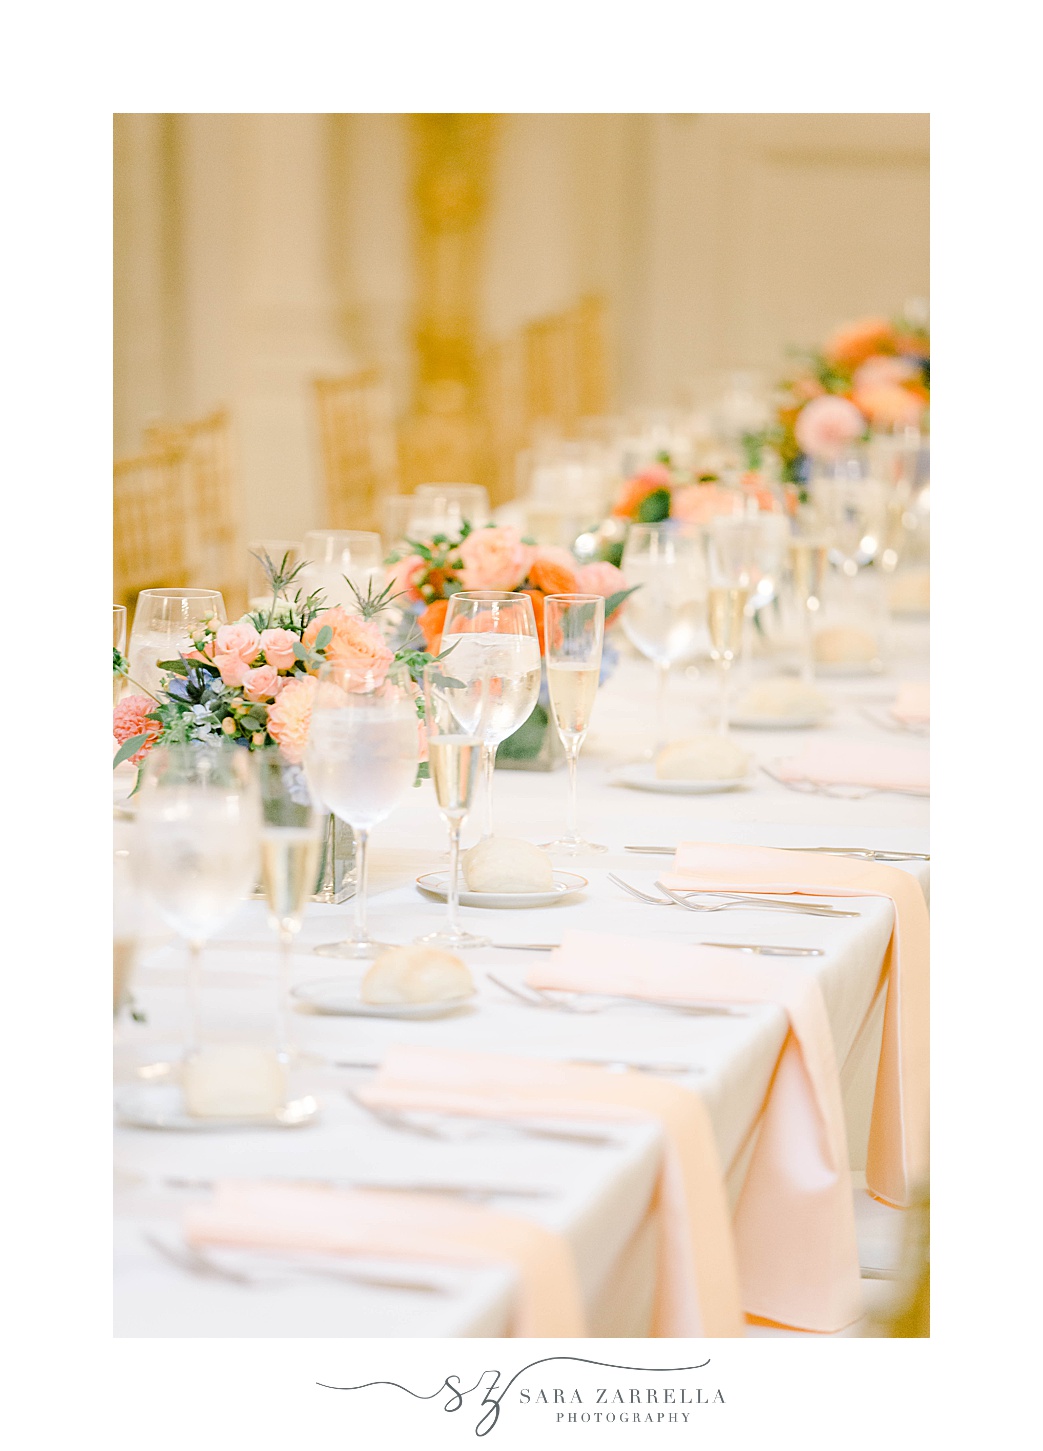 wedding reception tablescape at Rosecliff Mansion